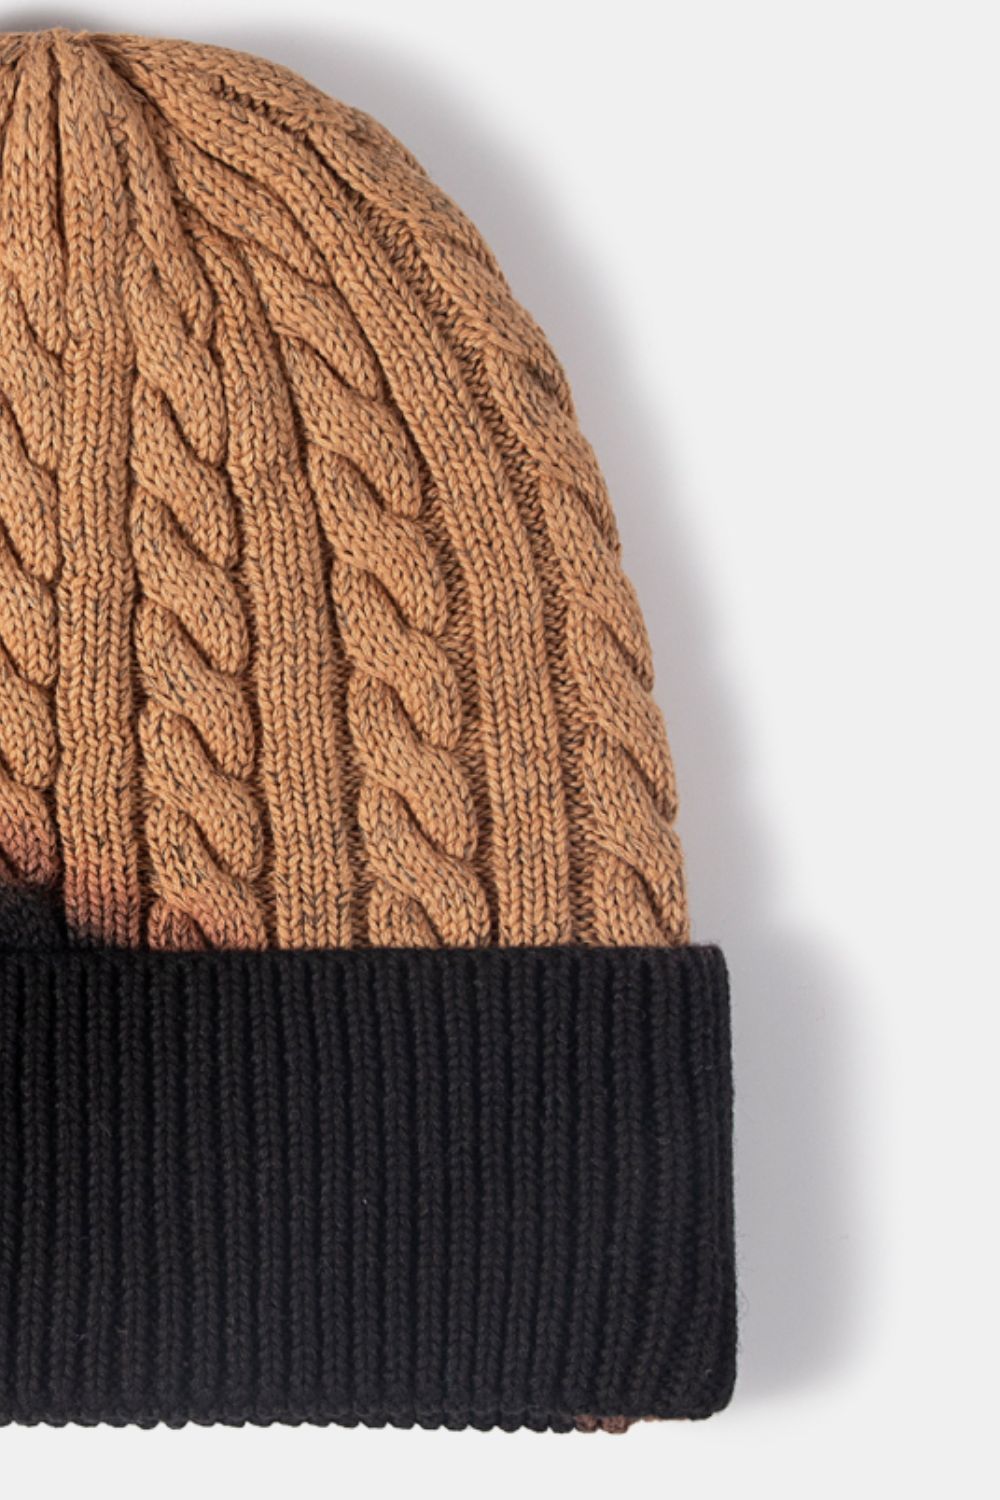 Black Contrast Tie-Dye Cable-Knit Cuffed Beanie Sentient Beauty Fashions *Accessories